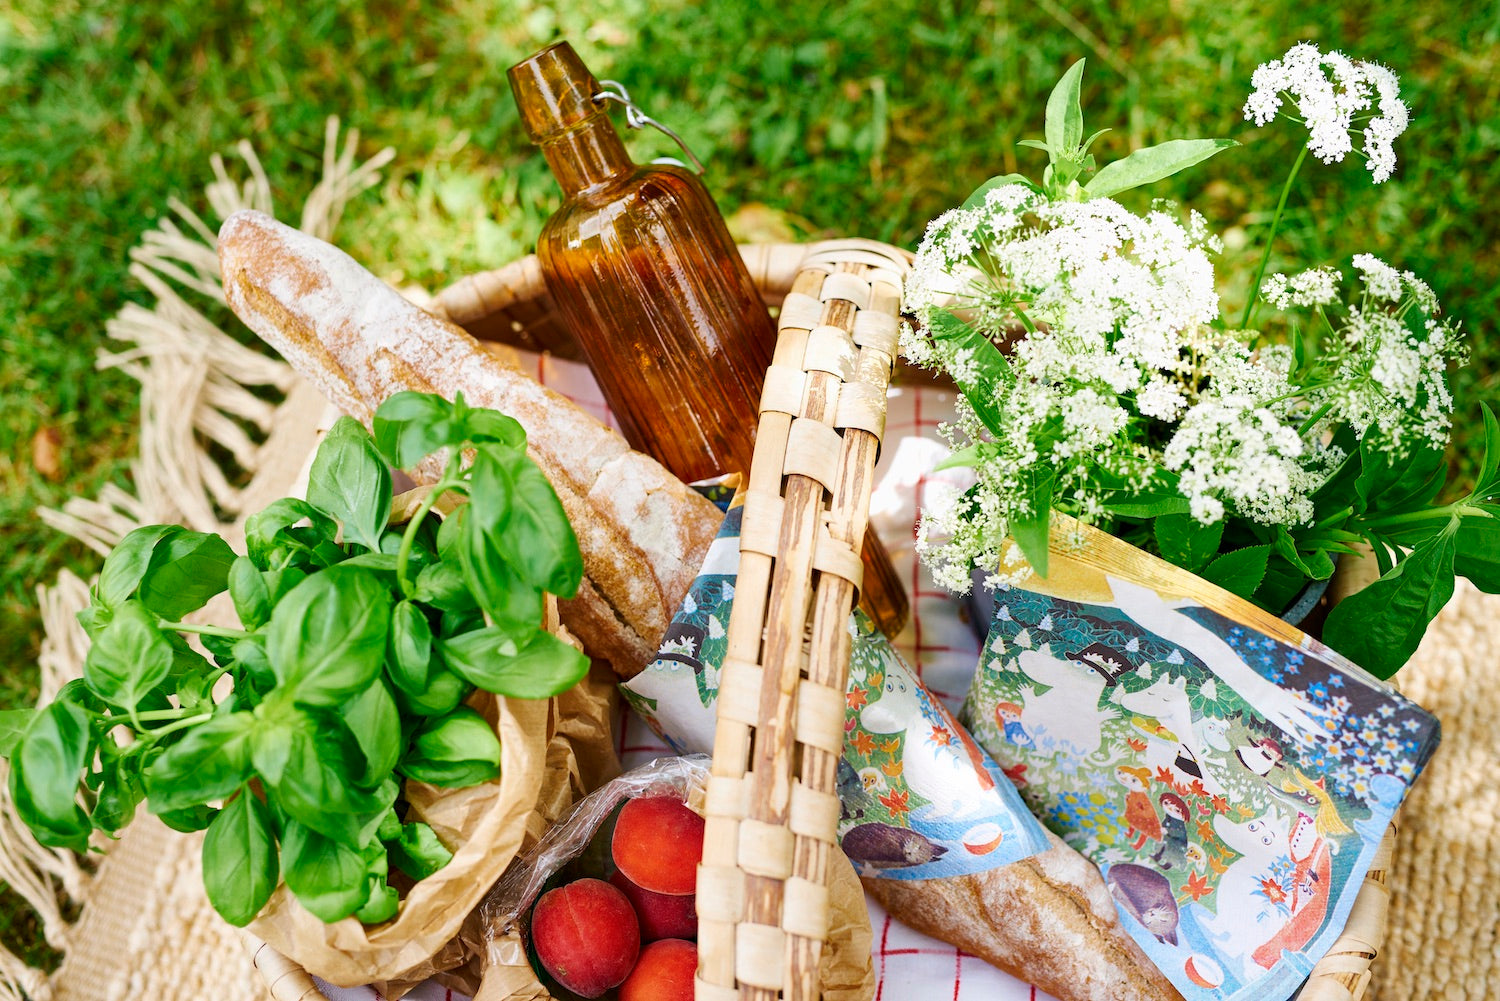 picnic basket with bread, herbs and Moomin napkins